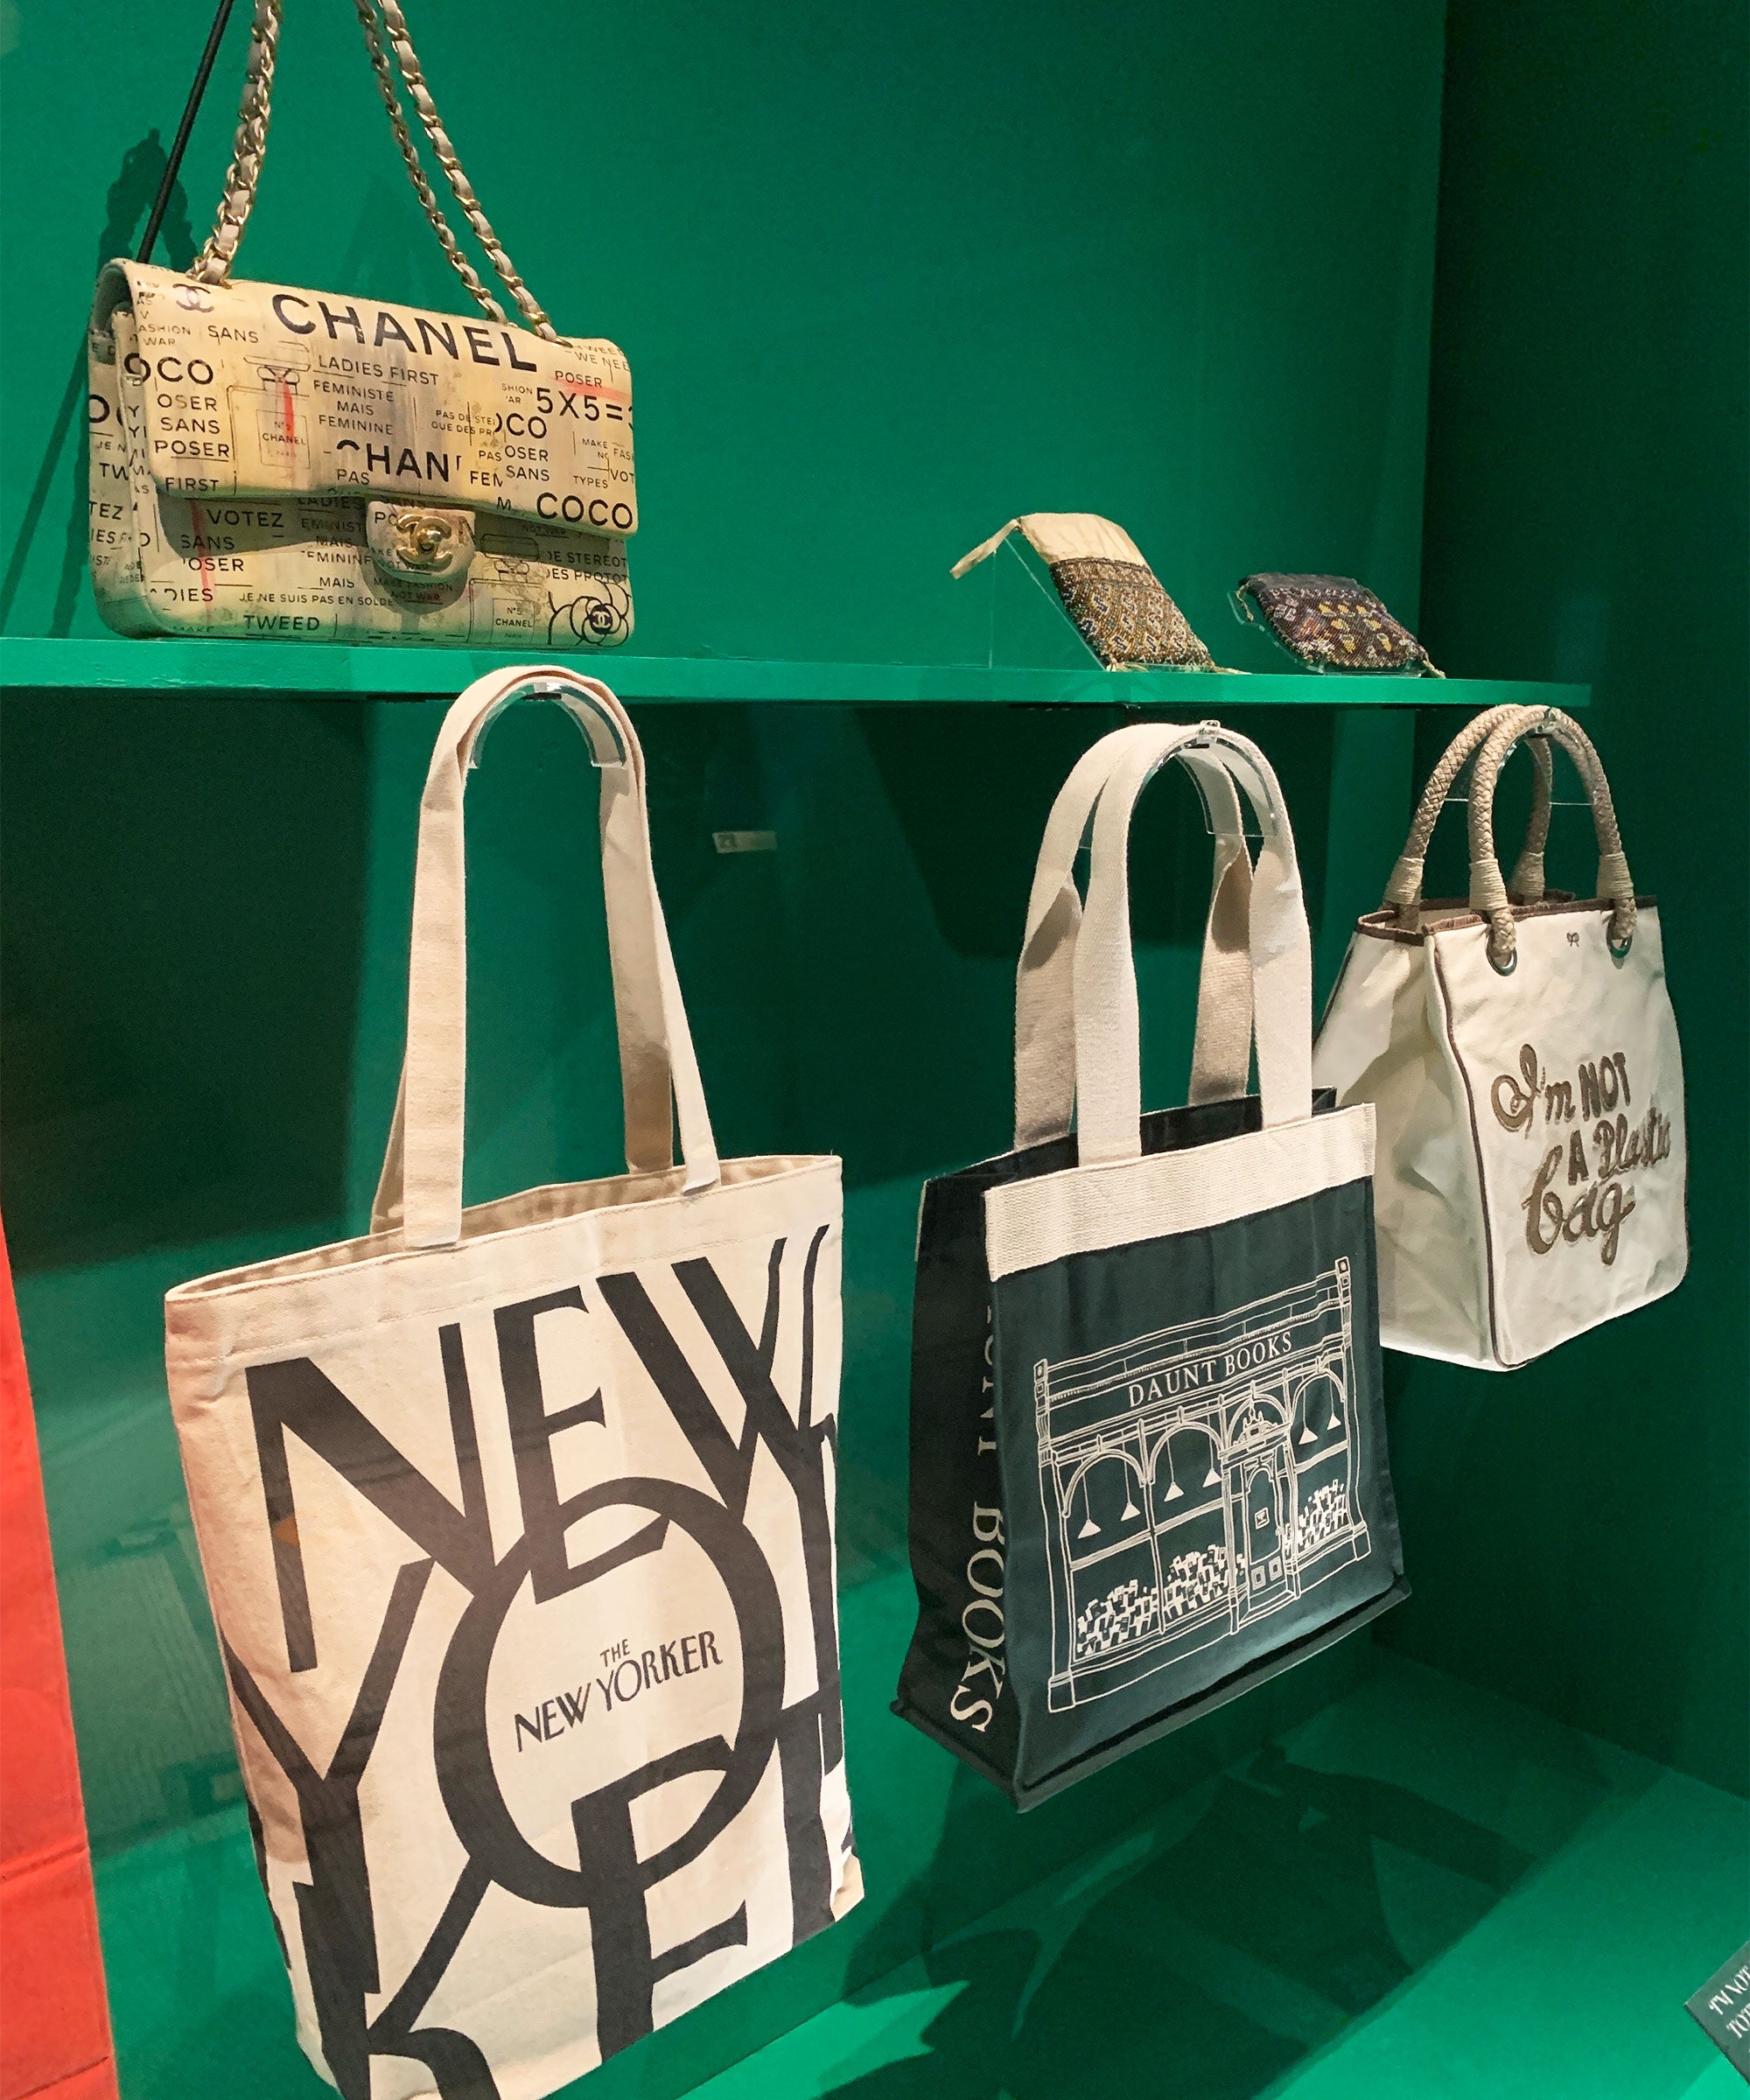 Bags- Inside Out: This London museum's historical handbag exhibit may stun  you